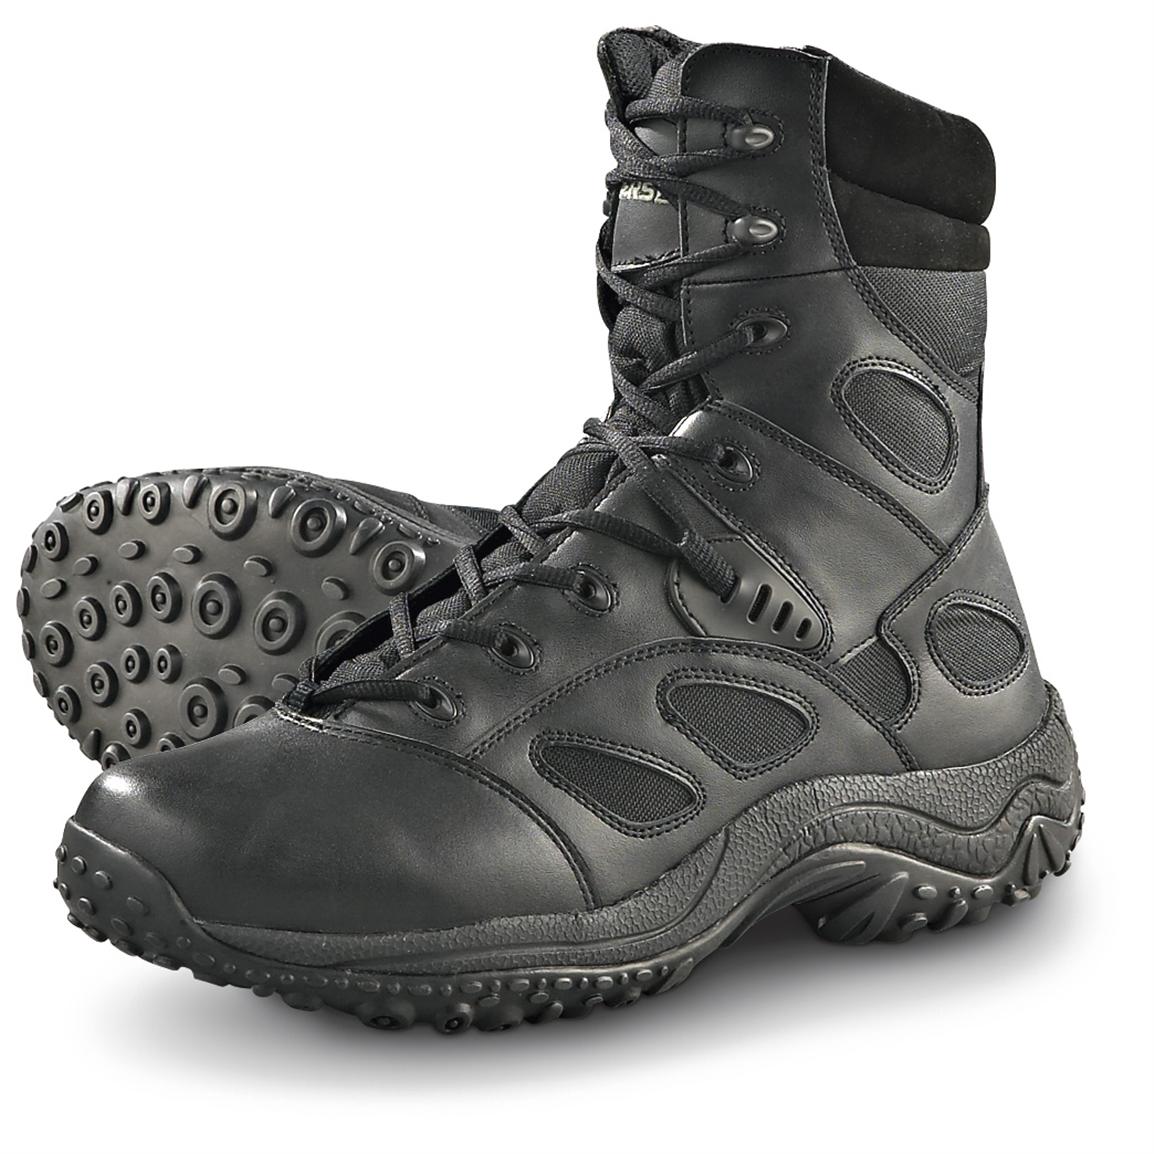 converse tactical safety toe side zip boot